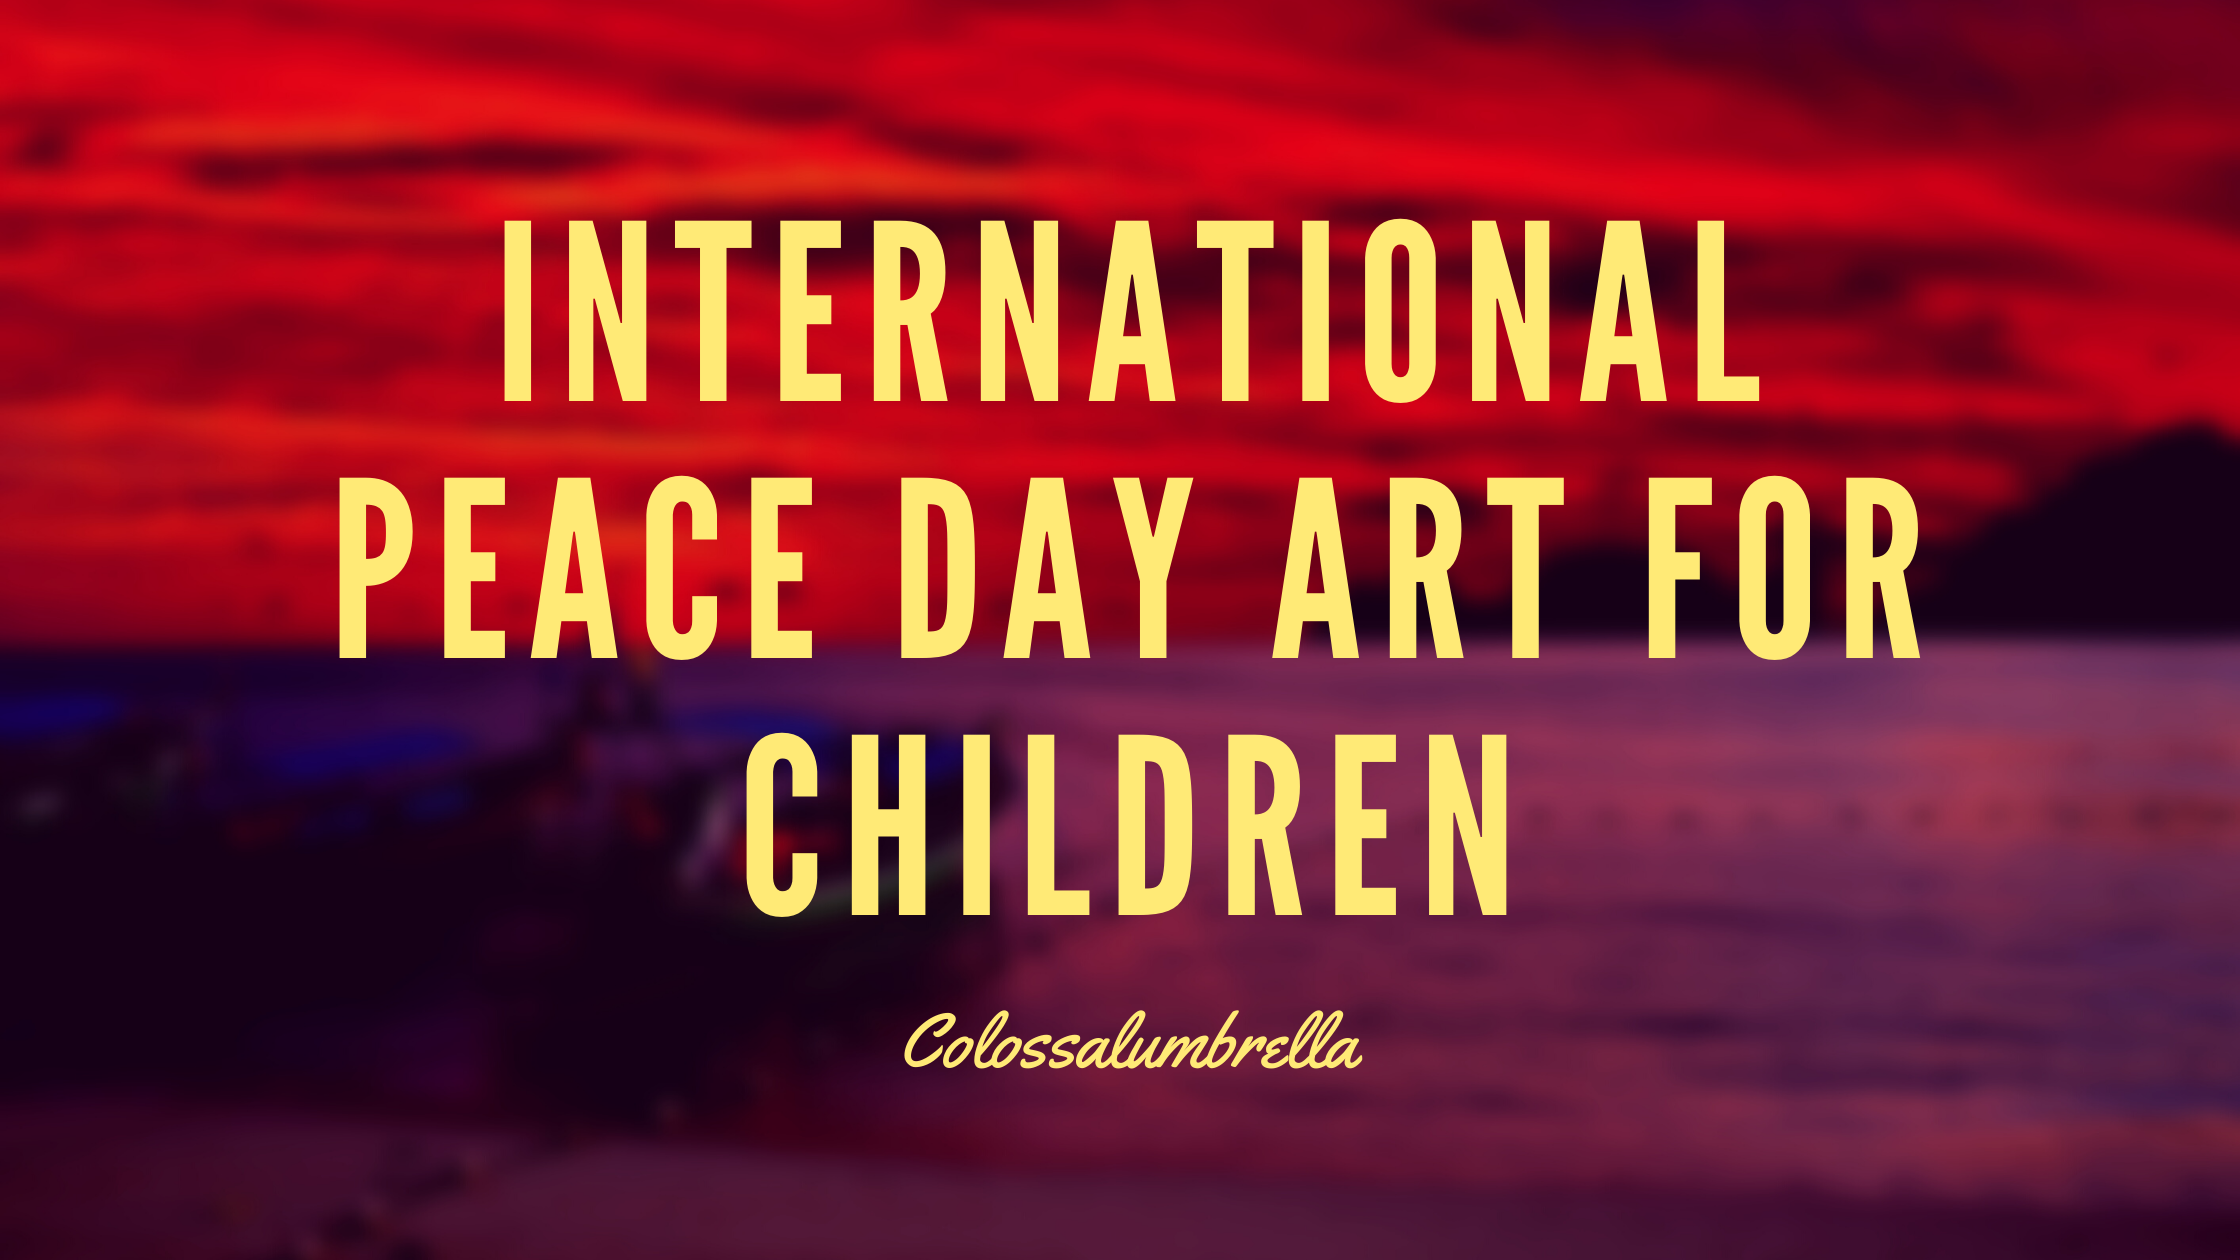 International Peace Day – Peace Day crafts